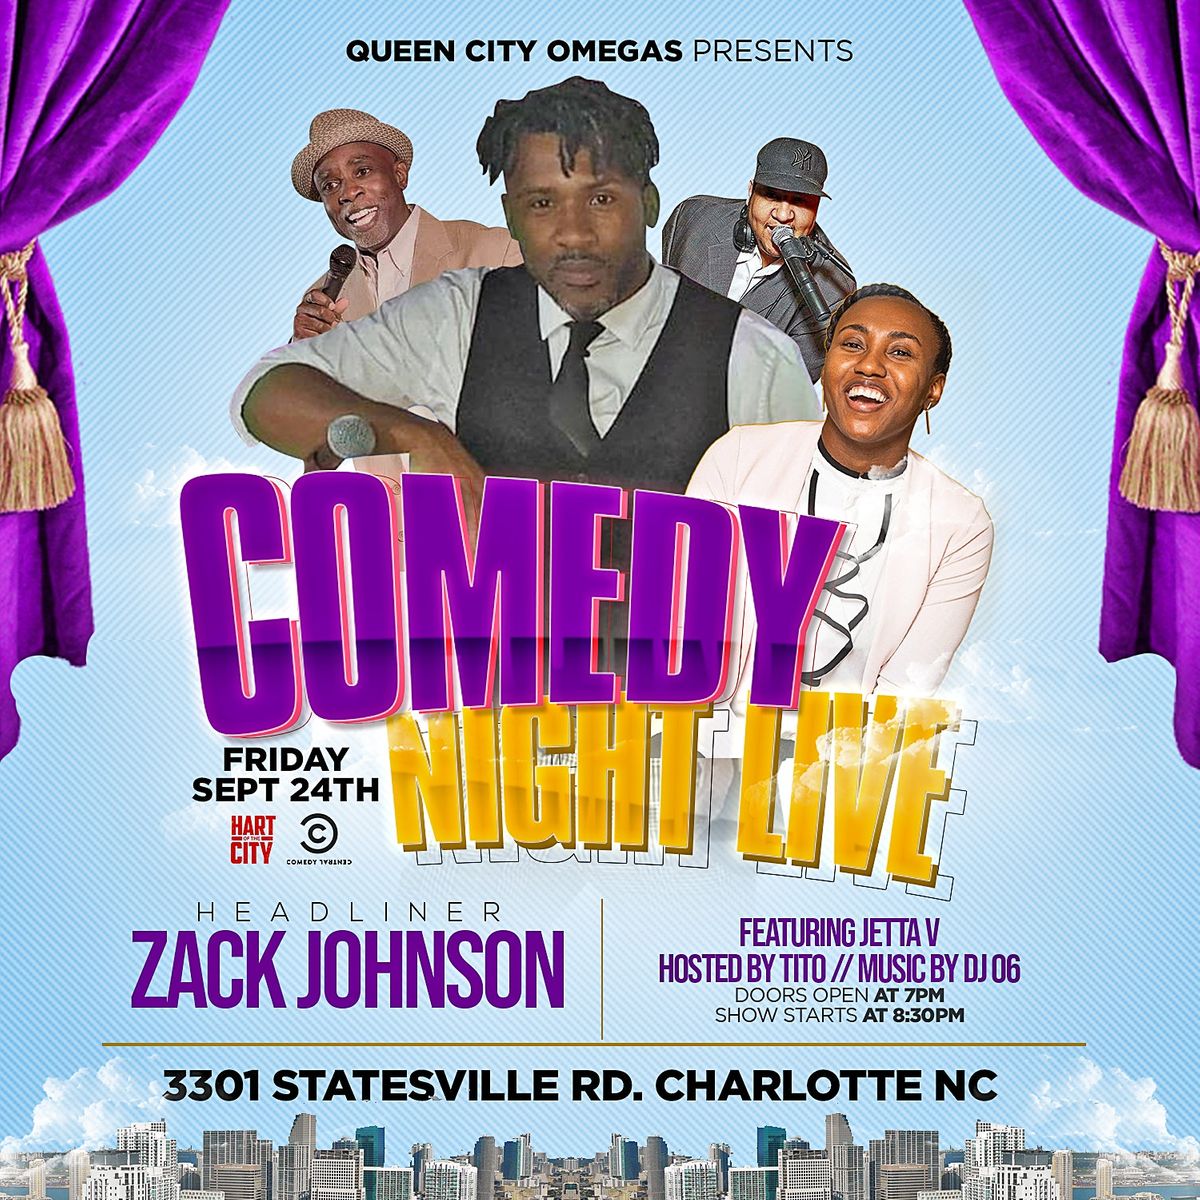 Queen City Omegas Comedy Night